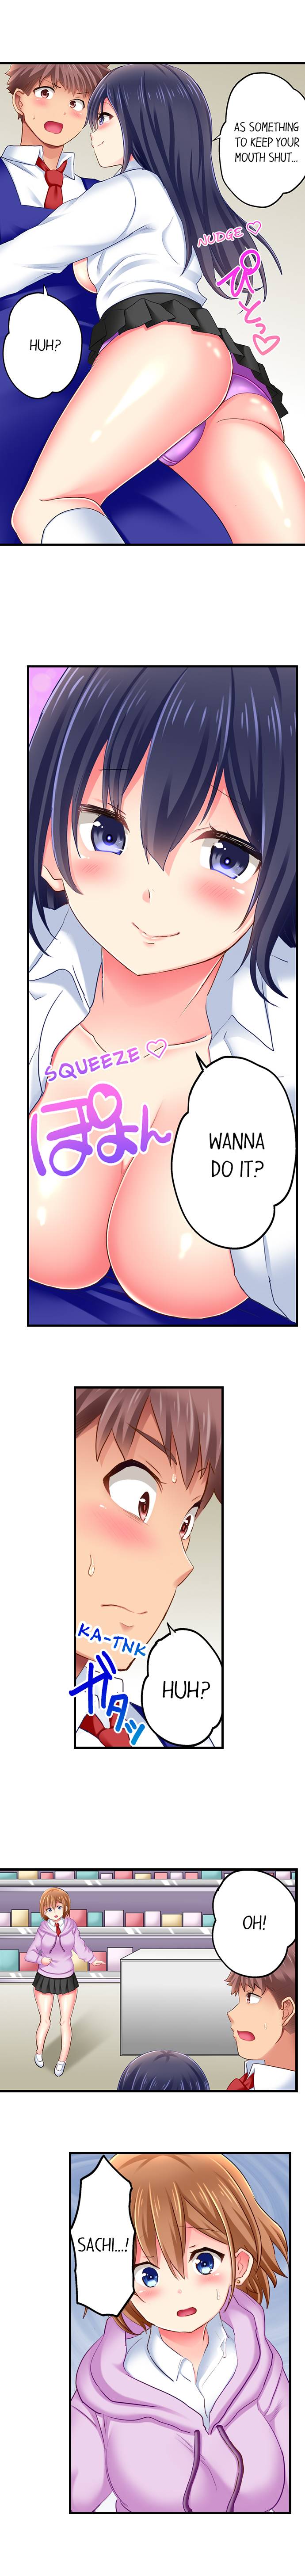 Sex in the Adult Toys Section - Chapter 7 Page 5